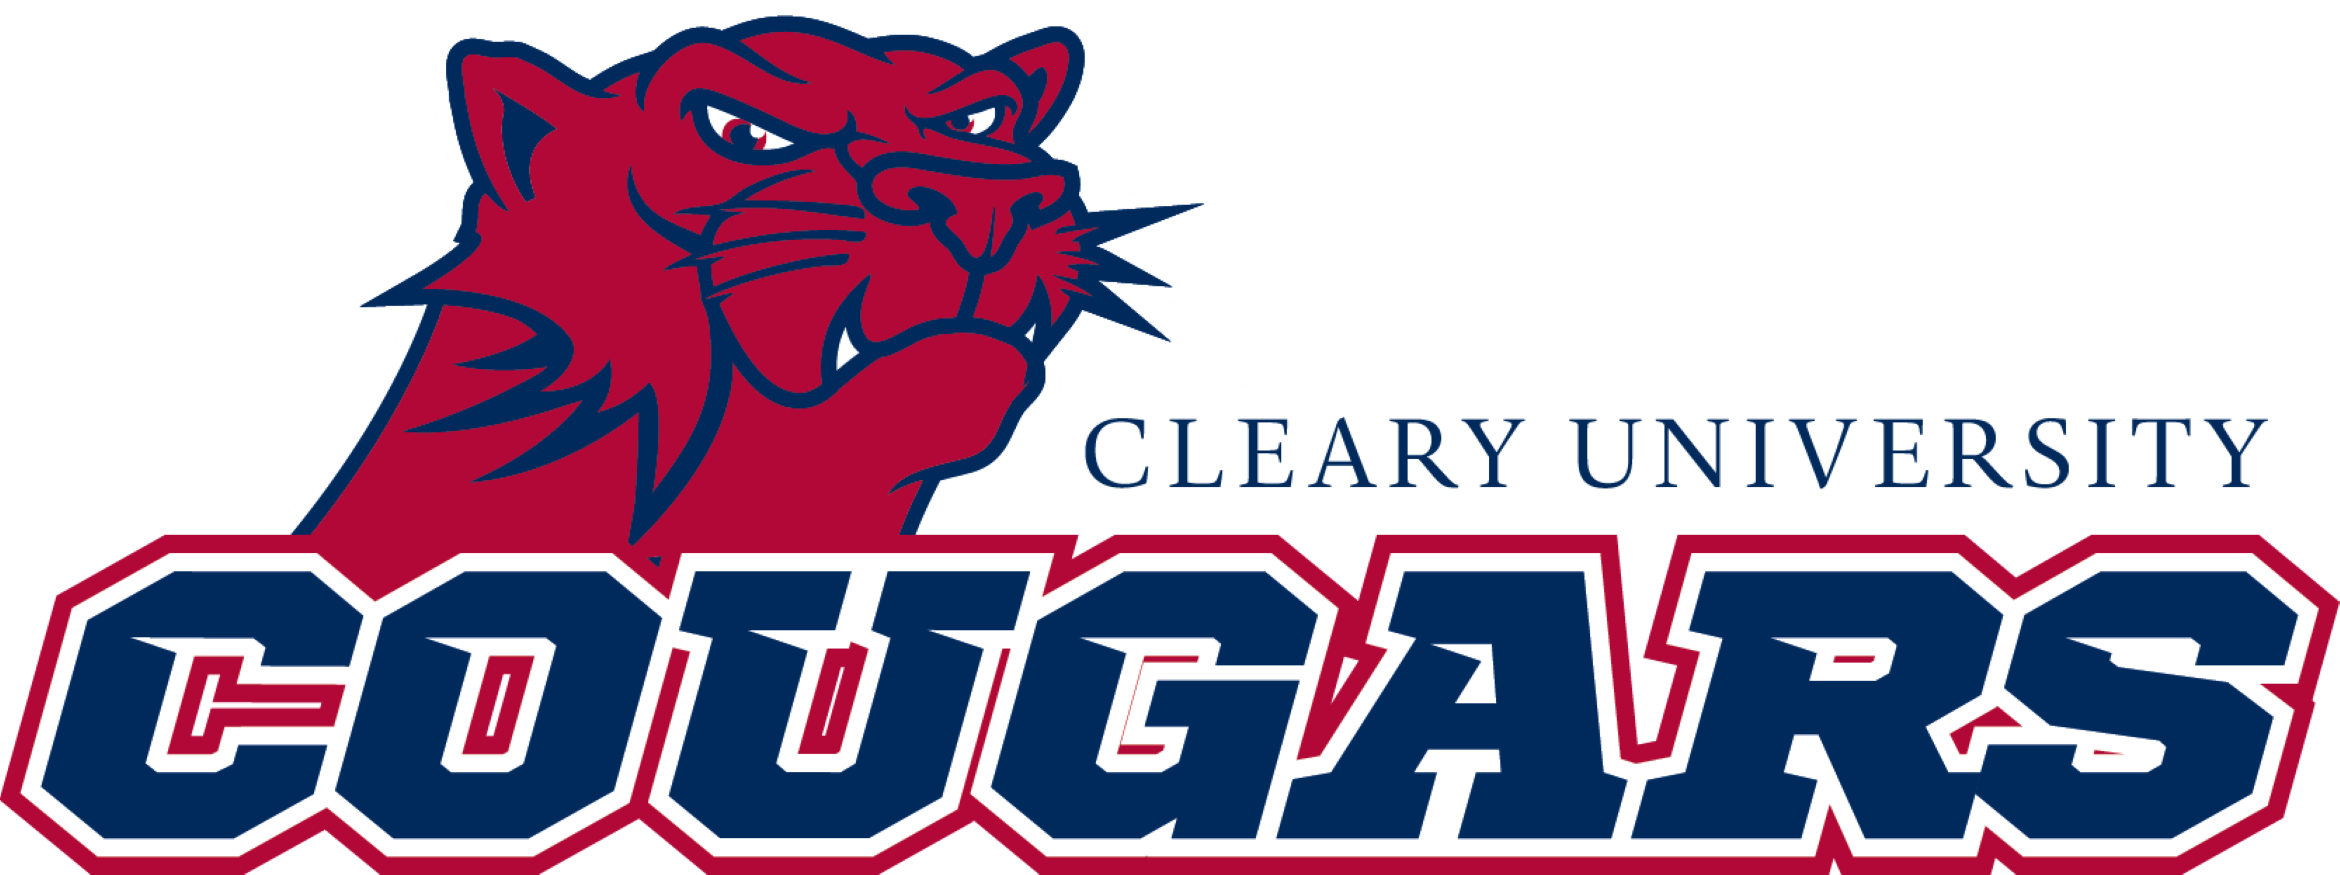 Cleary University Cougars